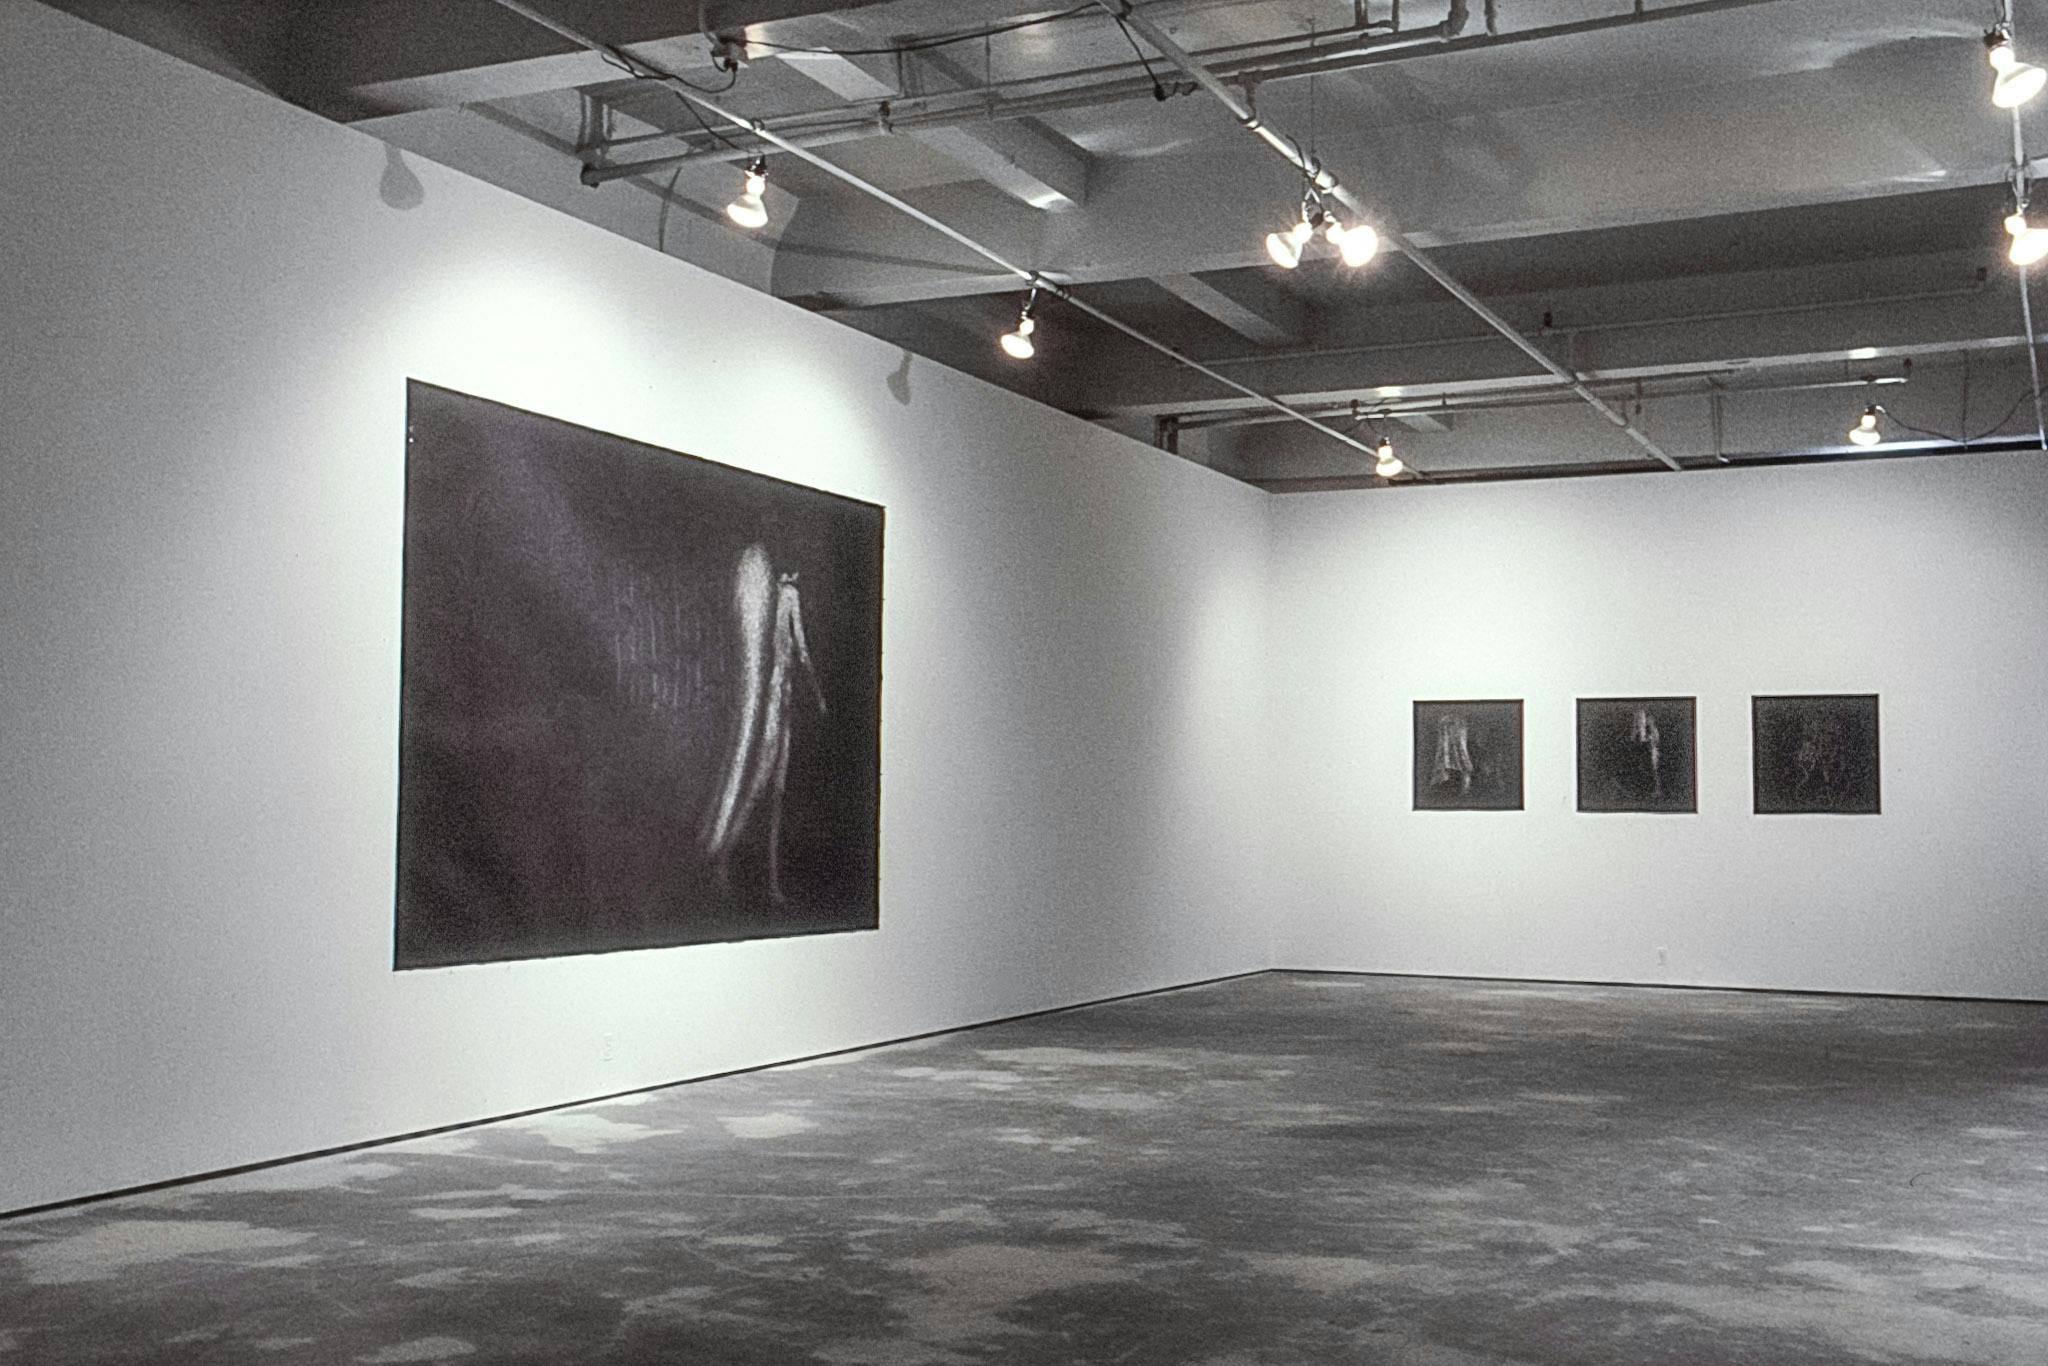 On one wall of a gallery, there is a large charcoal drawing of a nude angel walking. On the other wall, there are three small square drawings showing fabric and bodies. All drawings are very dark.